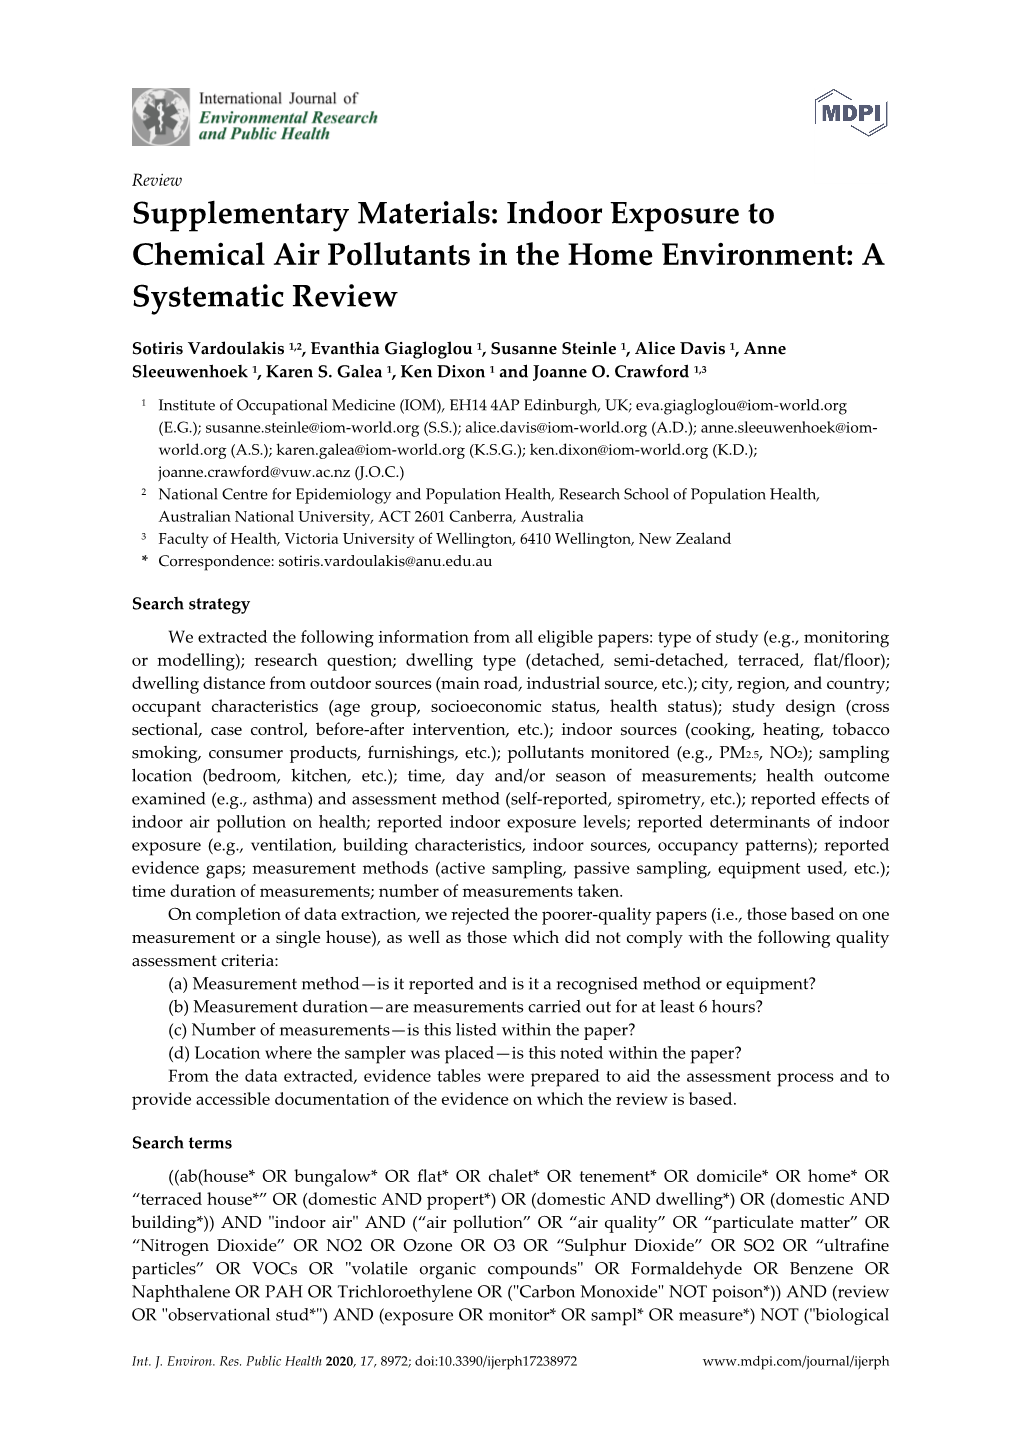 Indoor Exposure to Chemical Air Pollutants in the Home Environment: a Systematic Review